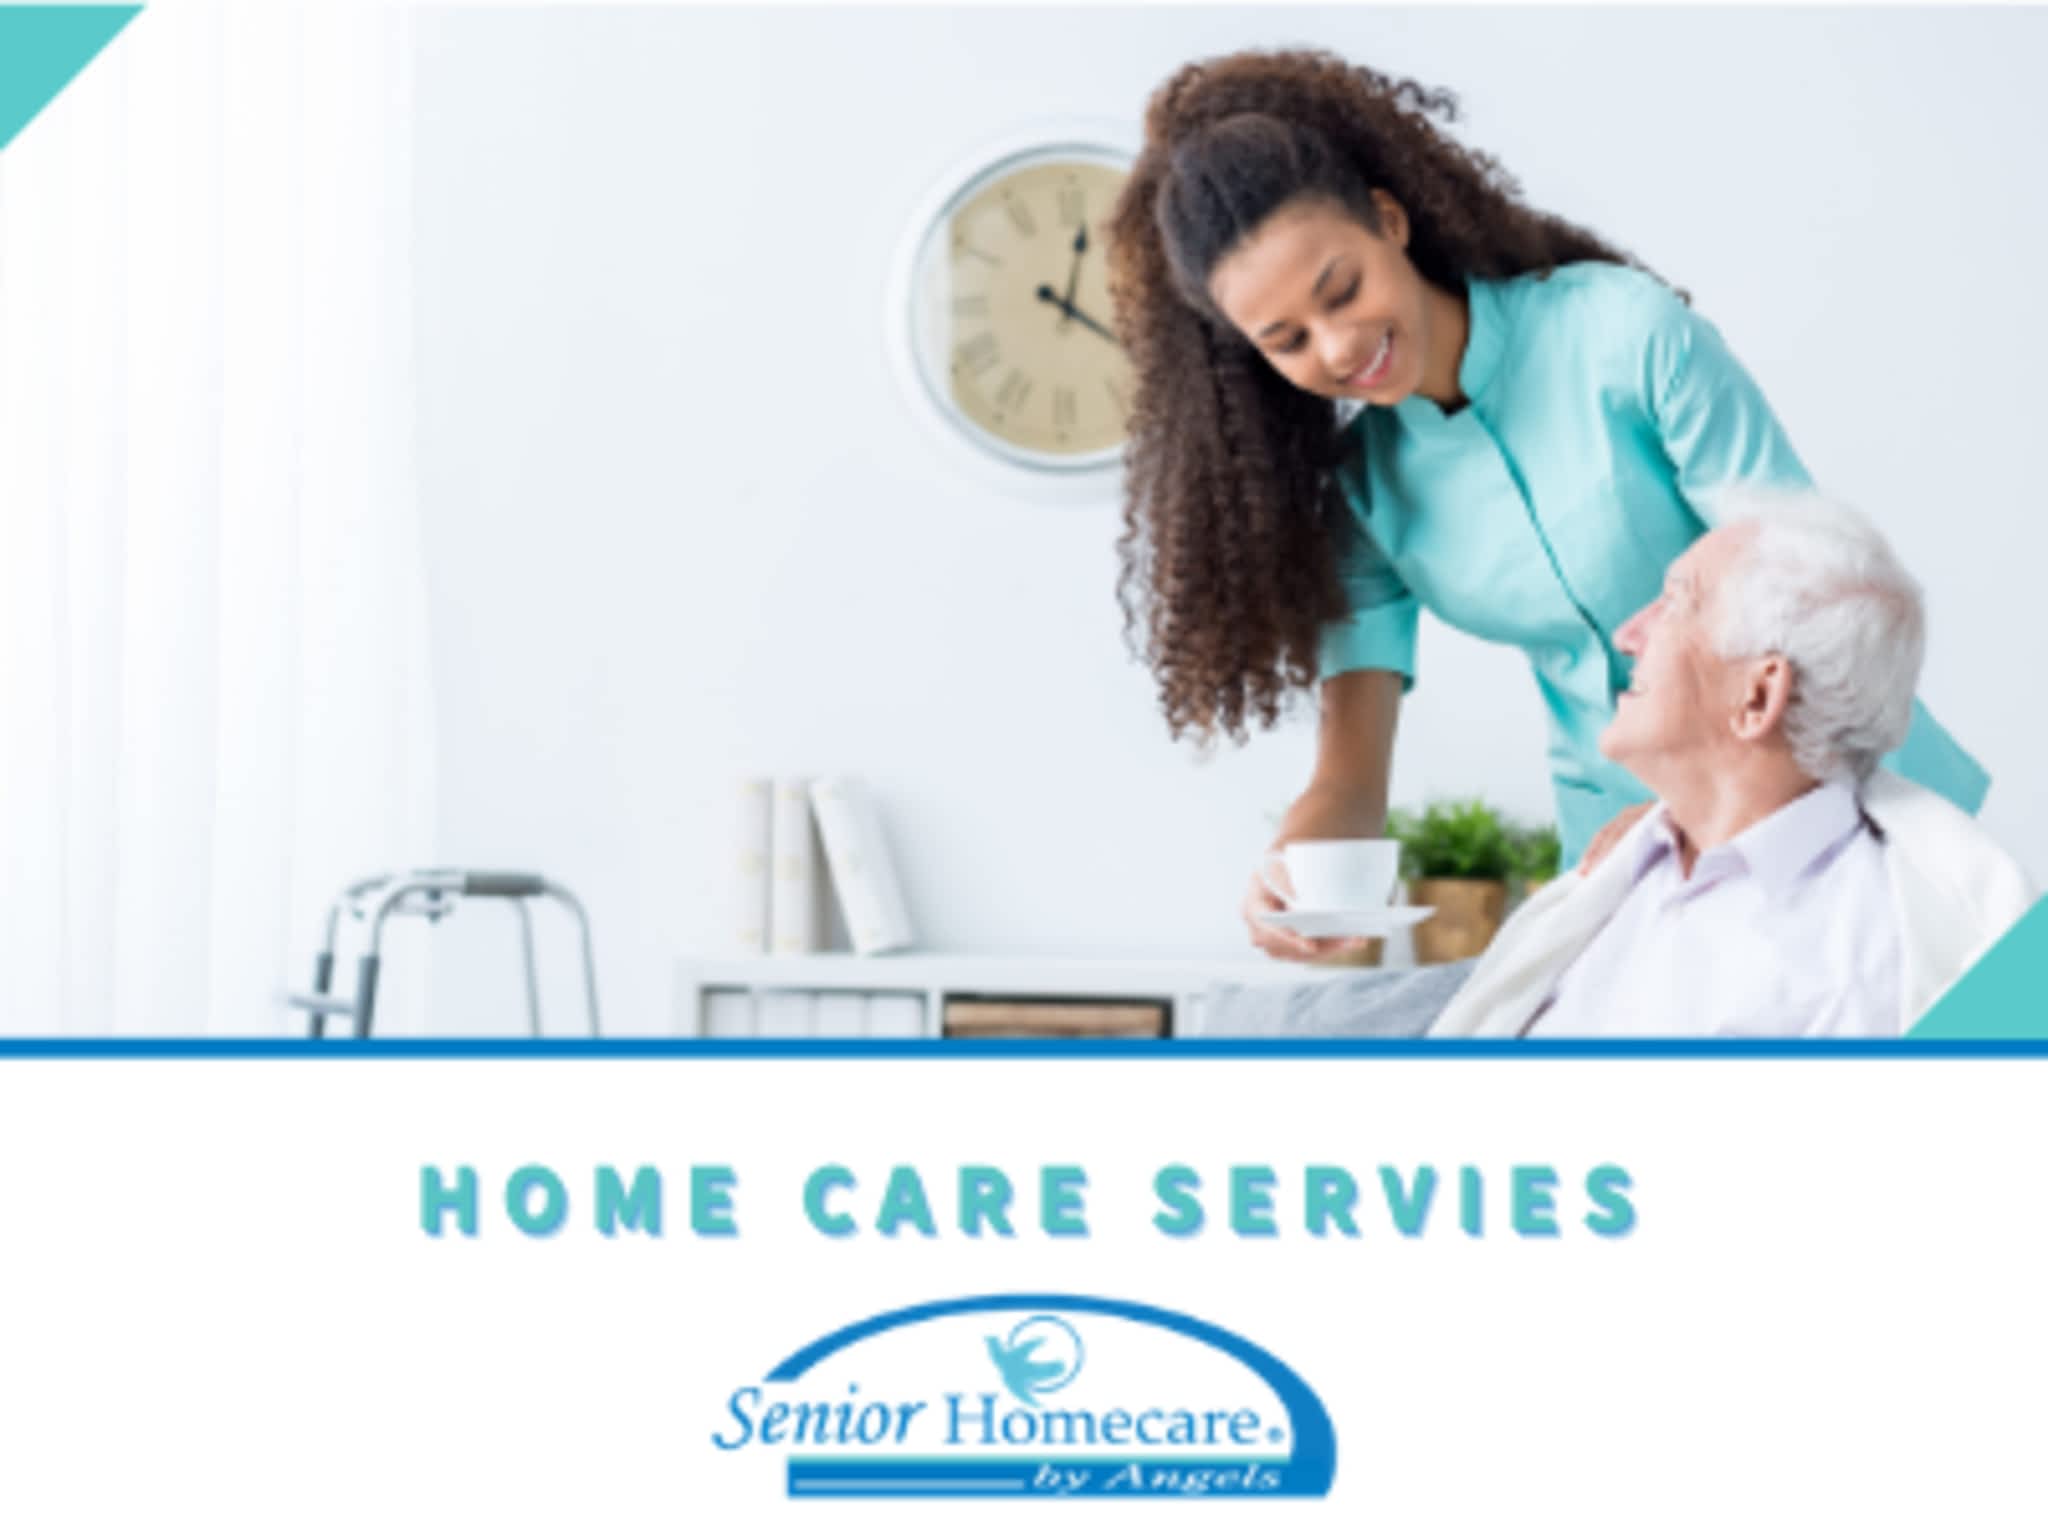 photo Senior Home Care By Angels